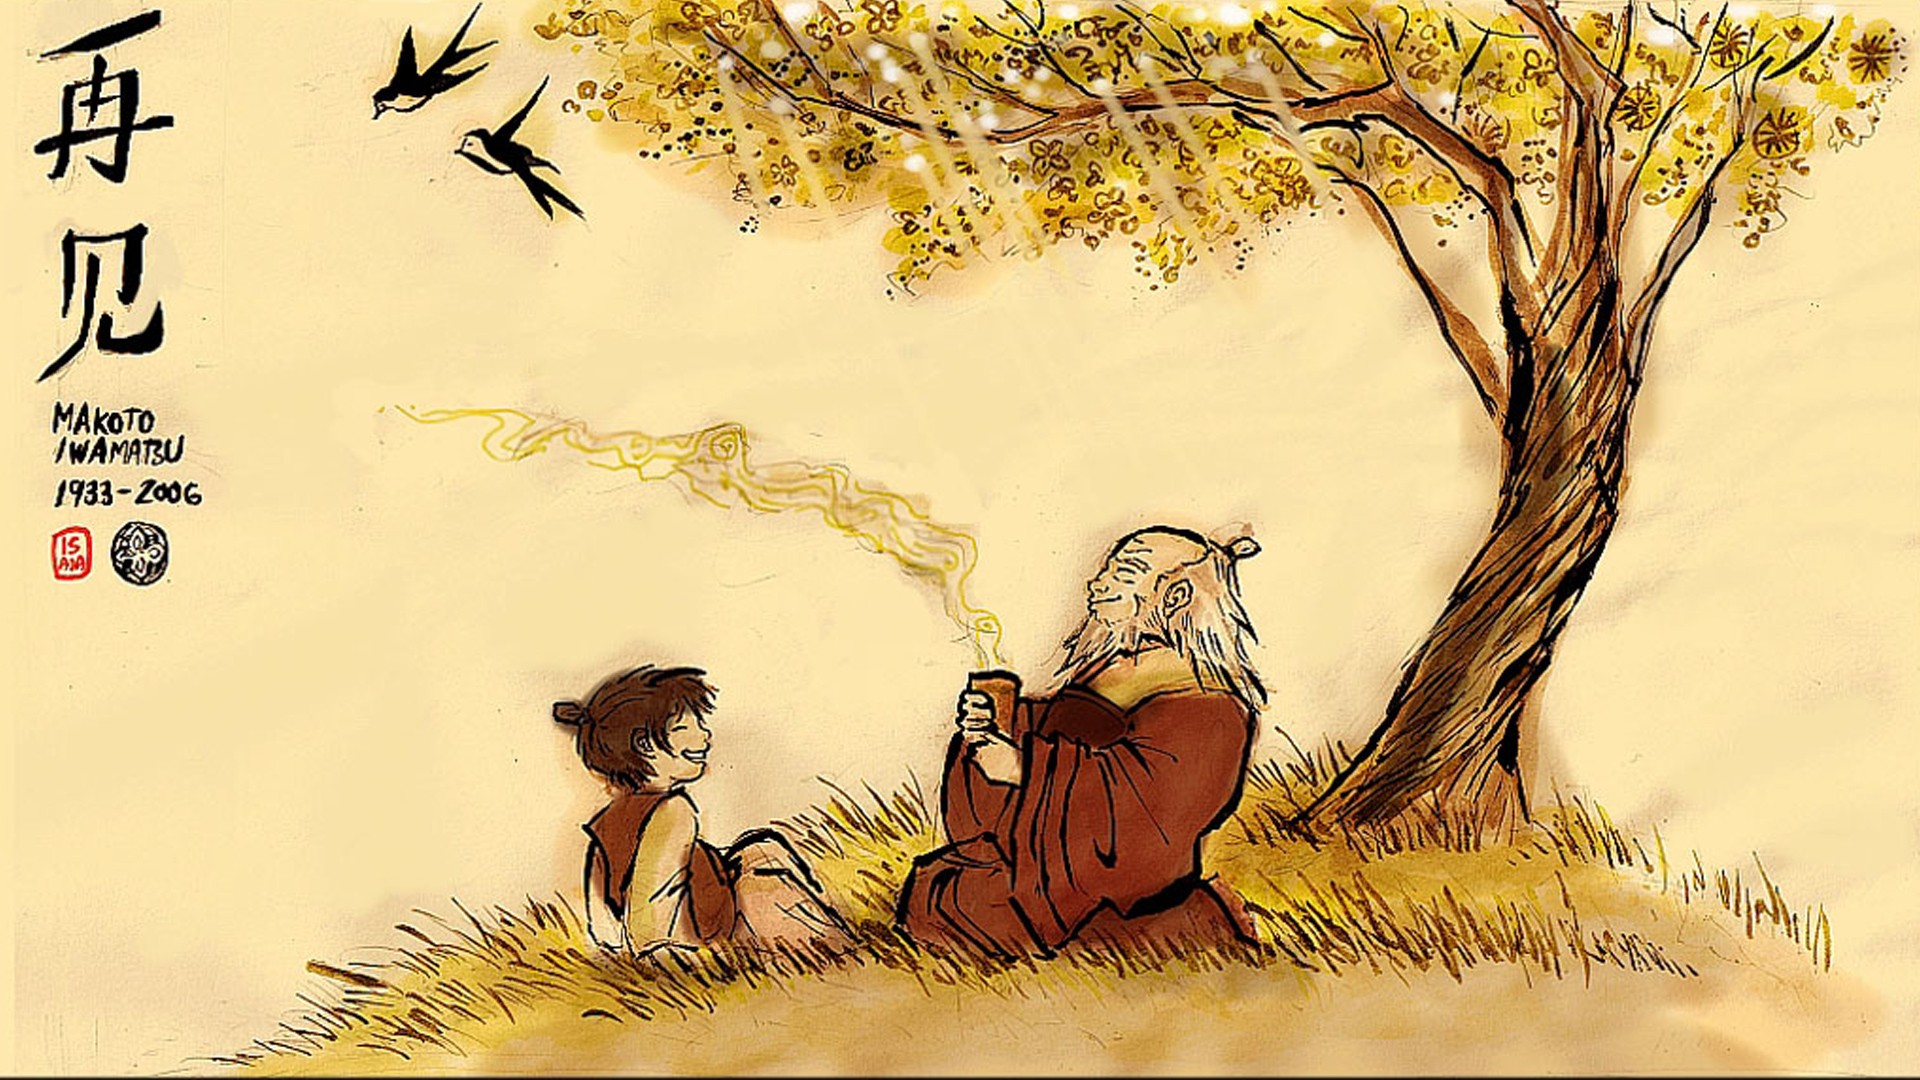 Avatar: The Last Airbender, General Iroh, Leaves From The Vine Wallpaper